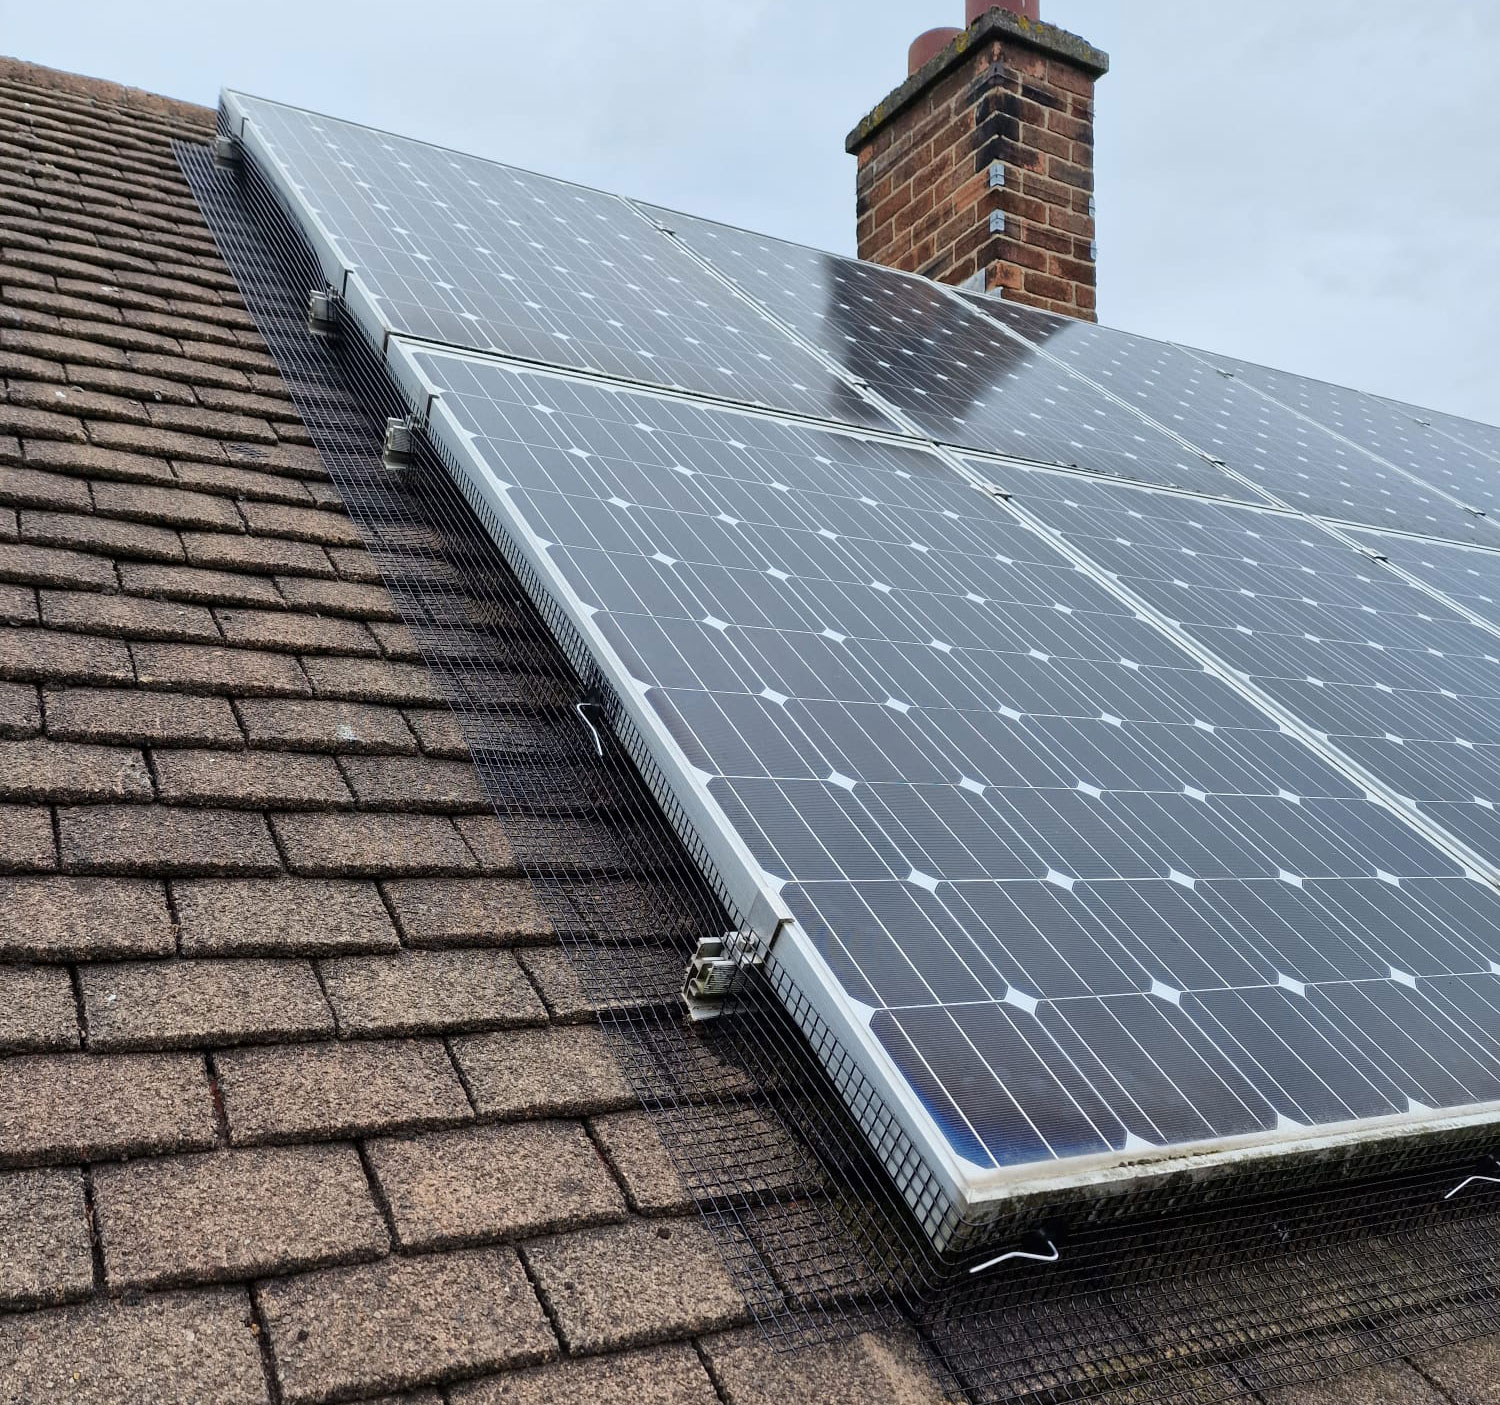 Pigeon Proofing Solar Panels in Sandiacre